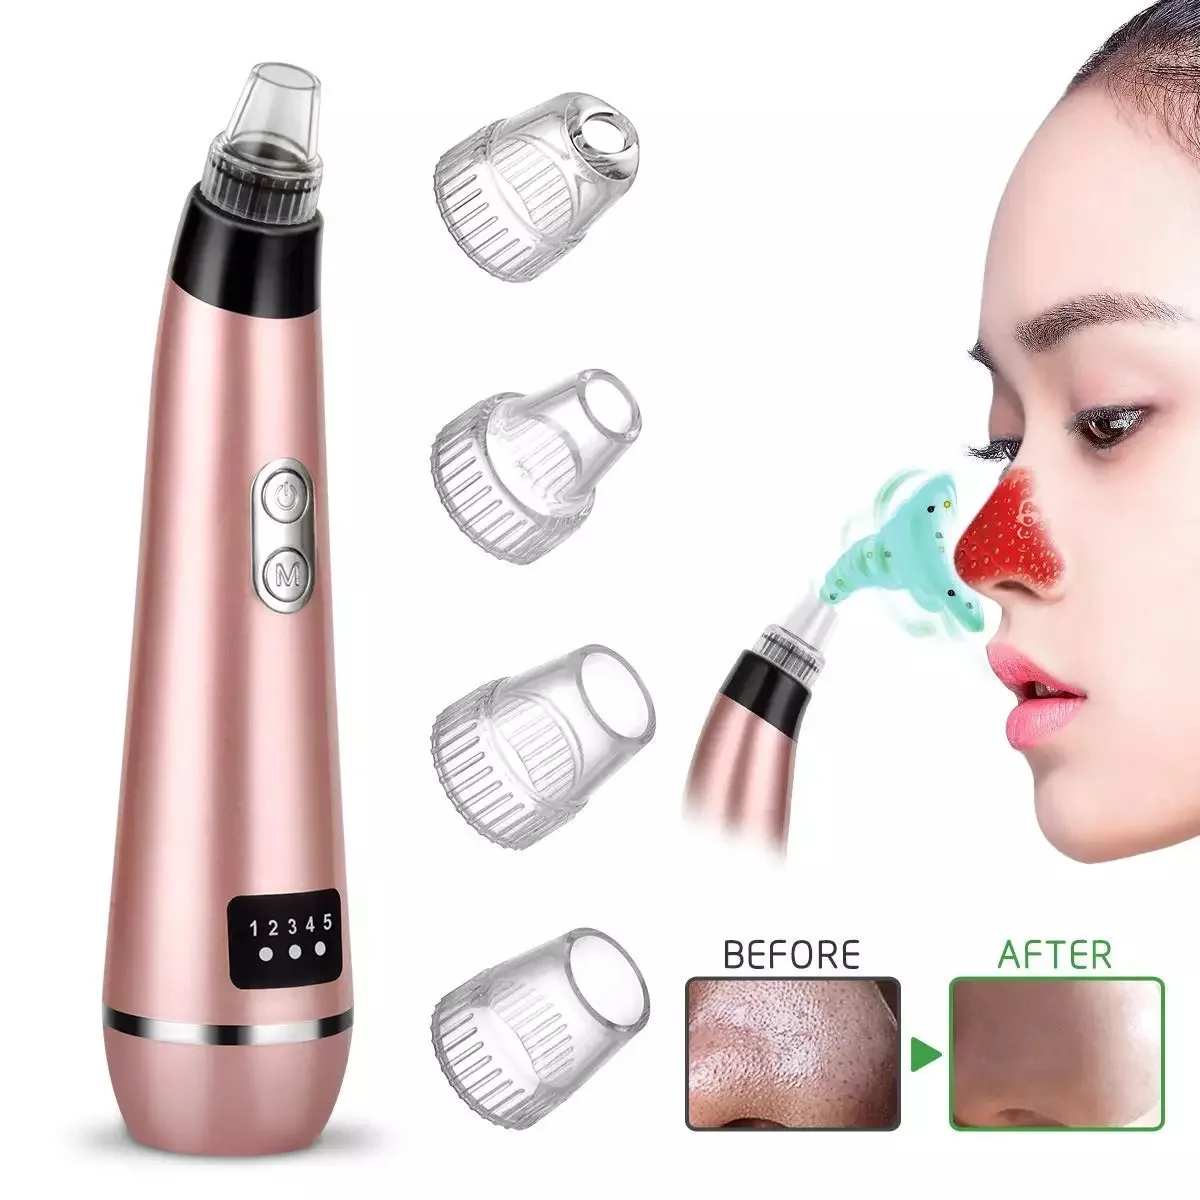 

japan face clean vacuum suction blackhead comedone acne pimple blemish extractor vacuum pore cleaner whitehead remover tool kit